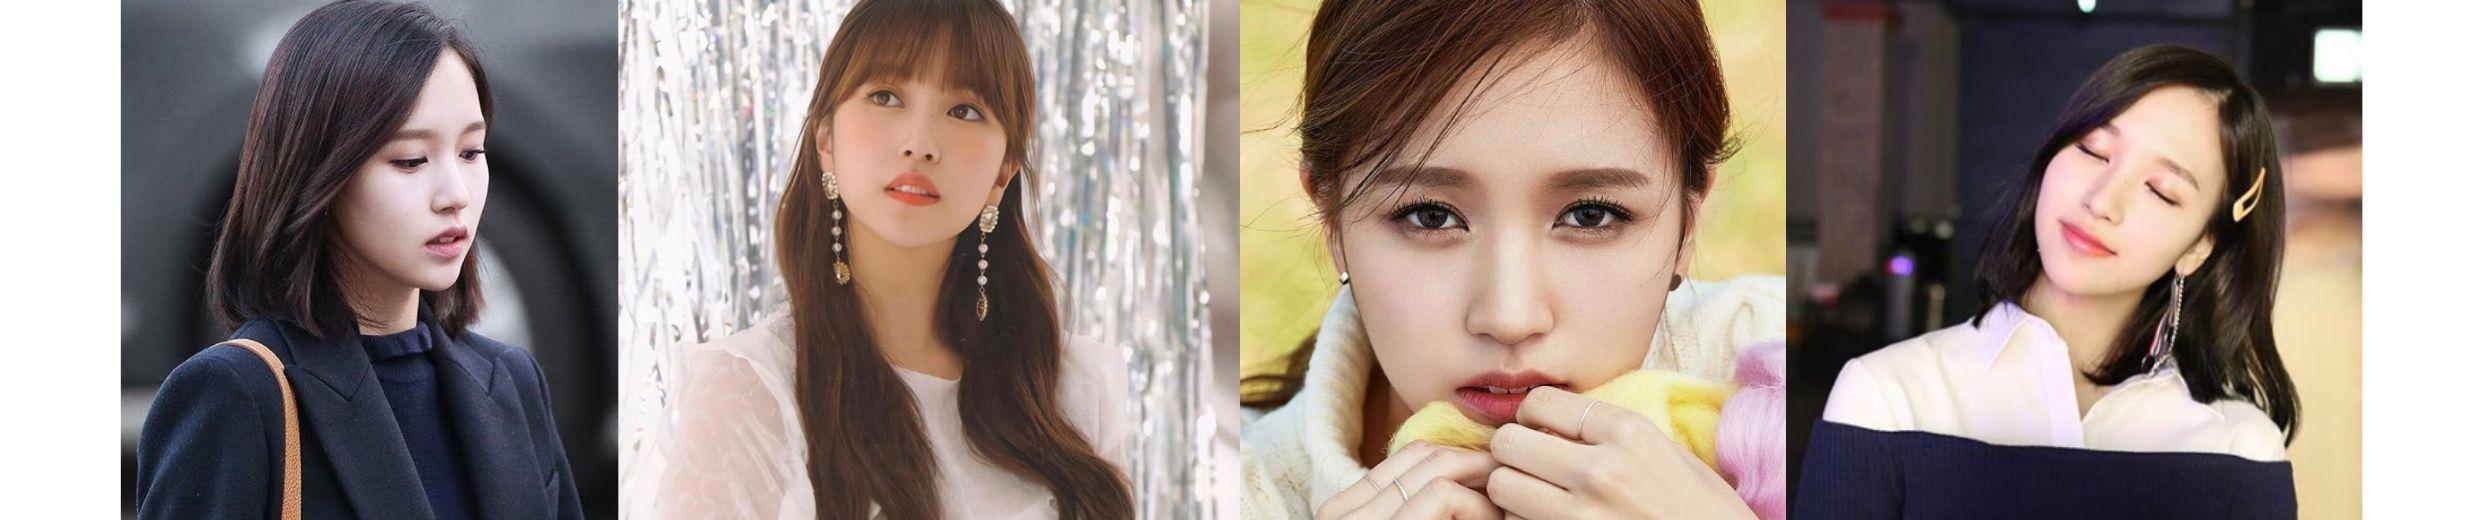 #GetWellSoonMina: The K-Pop Industry Is Finally Opening Up to Mental Health Issues